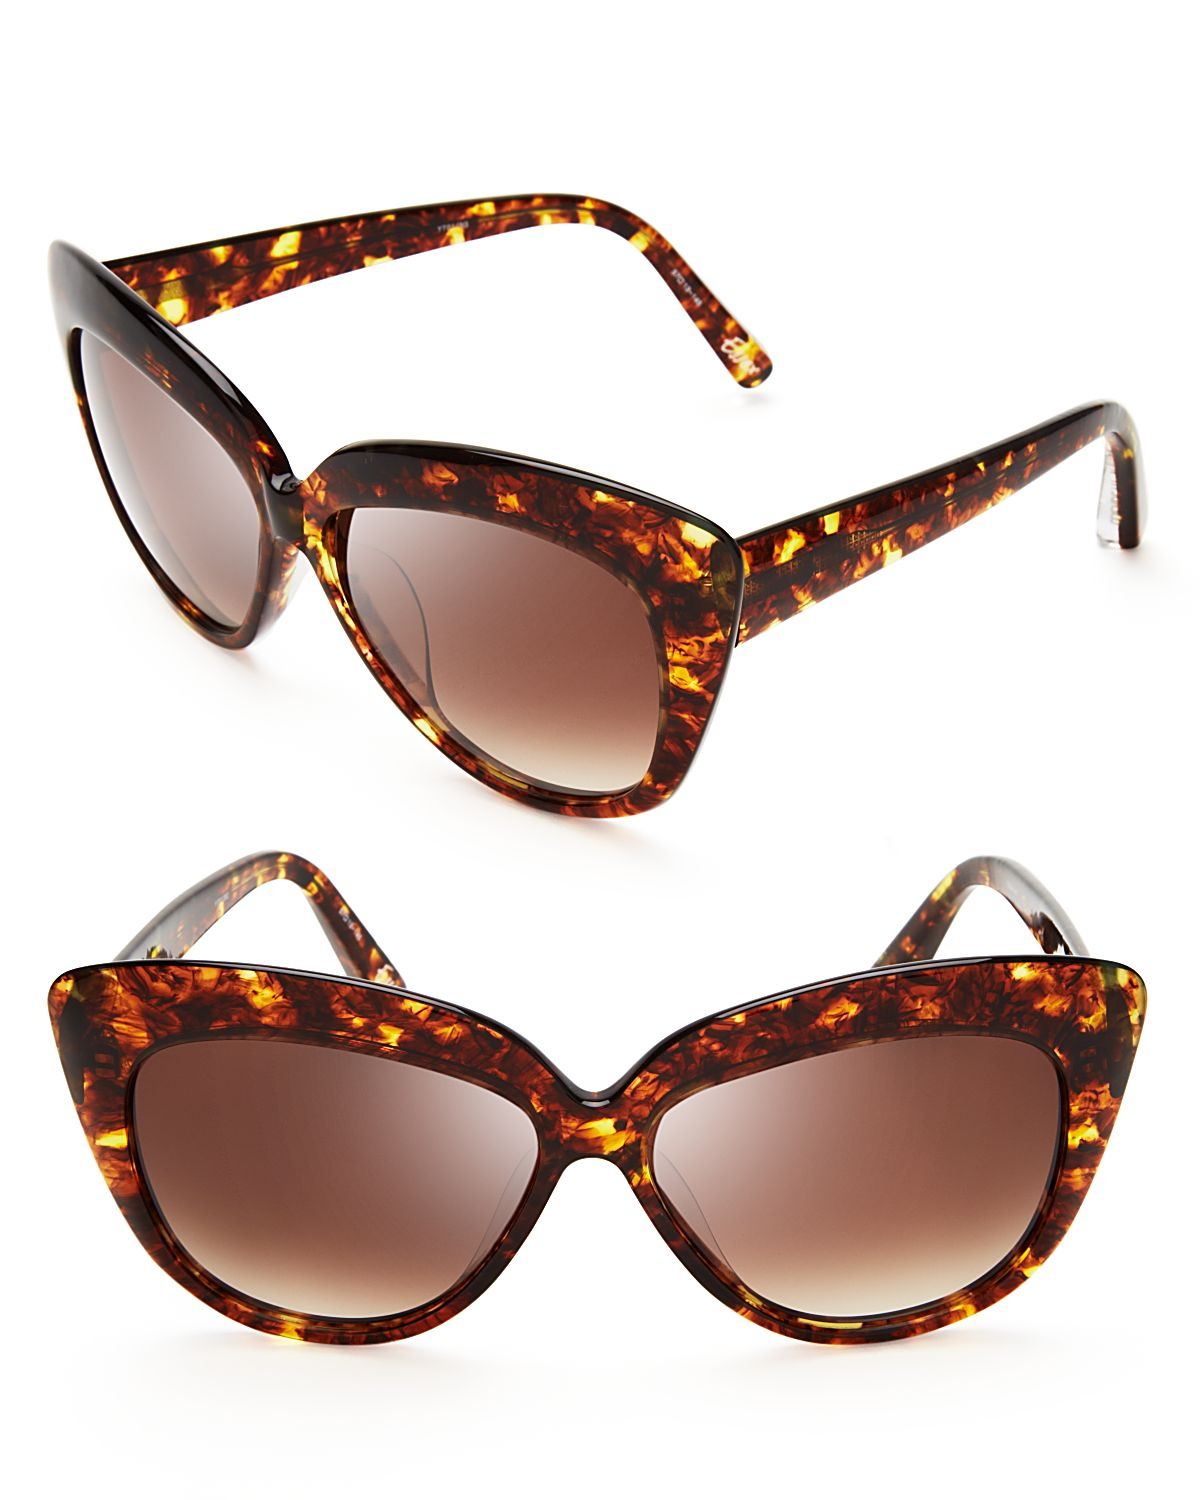 Elizabeth and james Essex Oversized Cat Eye Sunglasses in Brown | Lyst